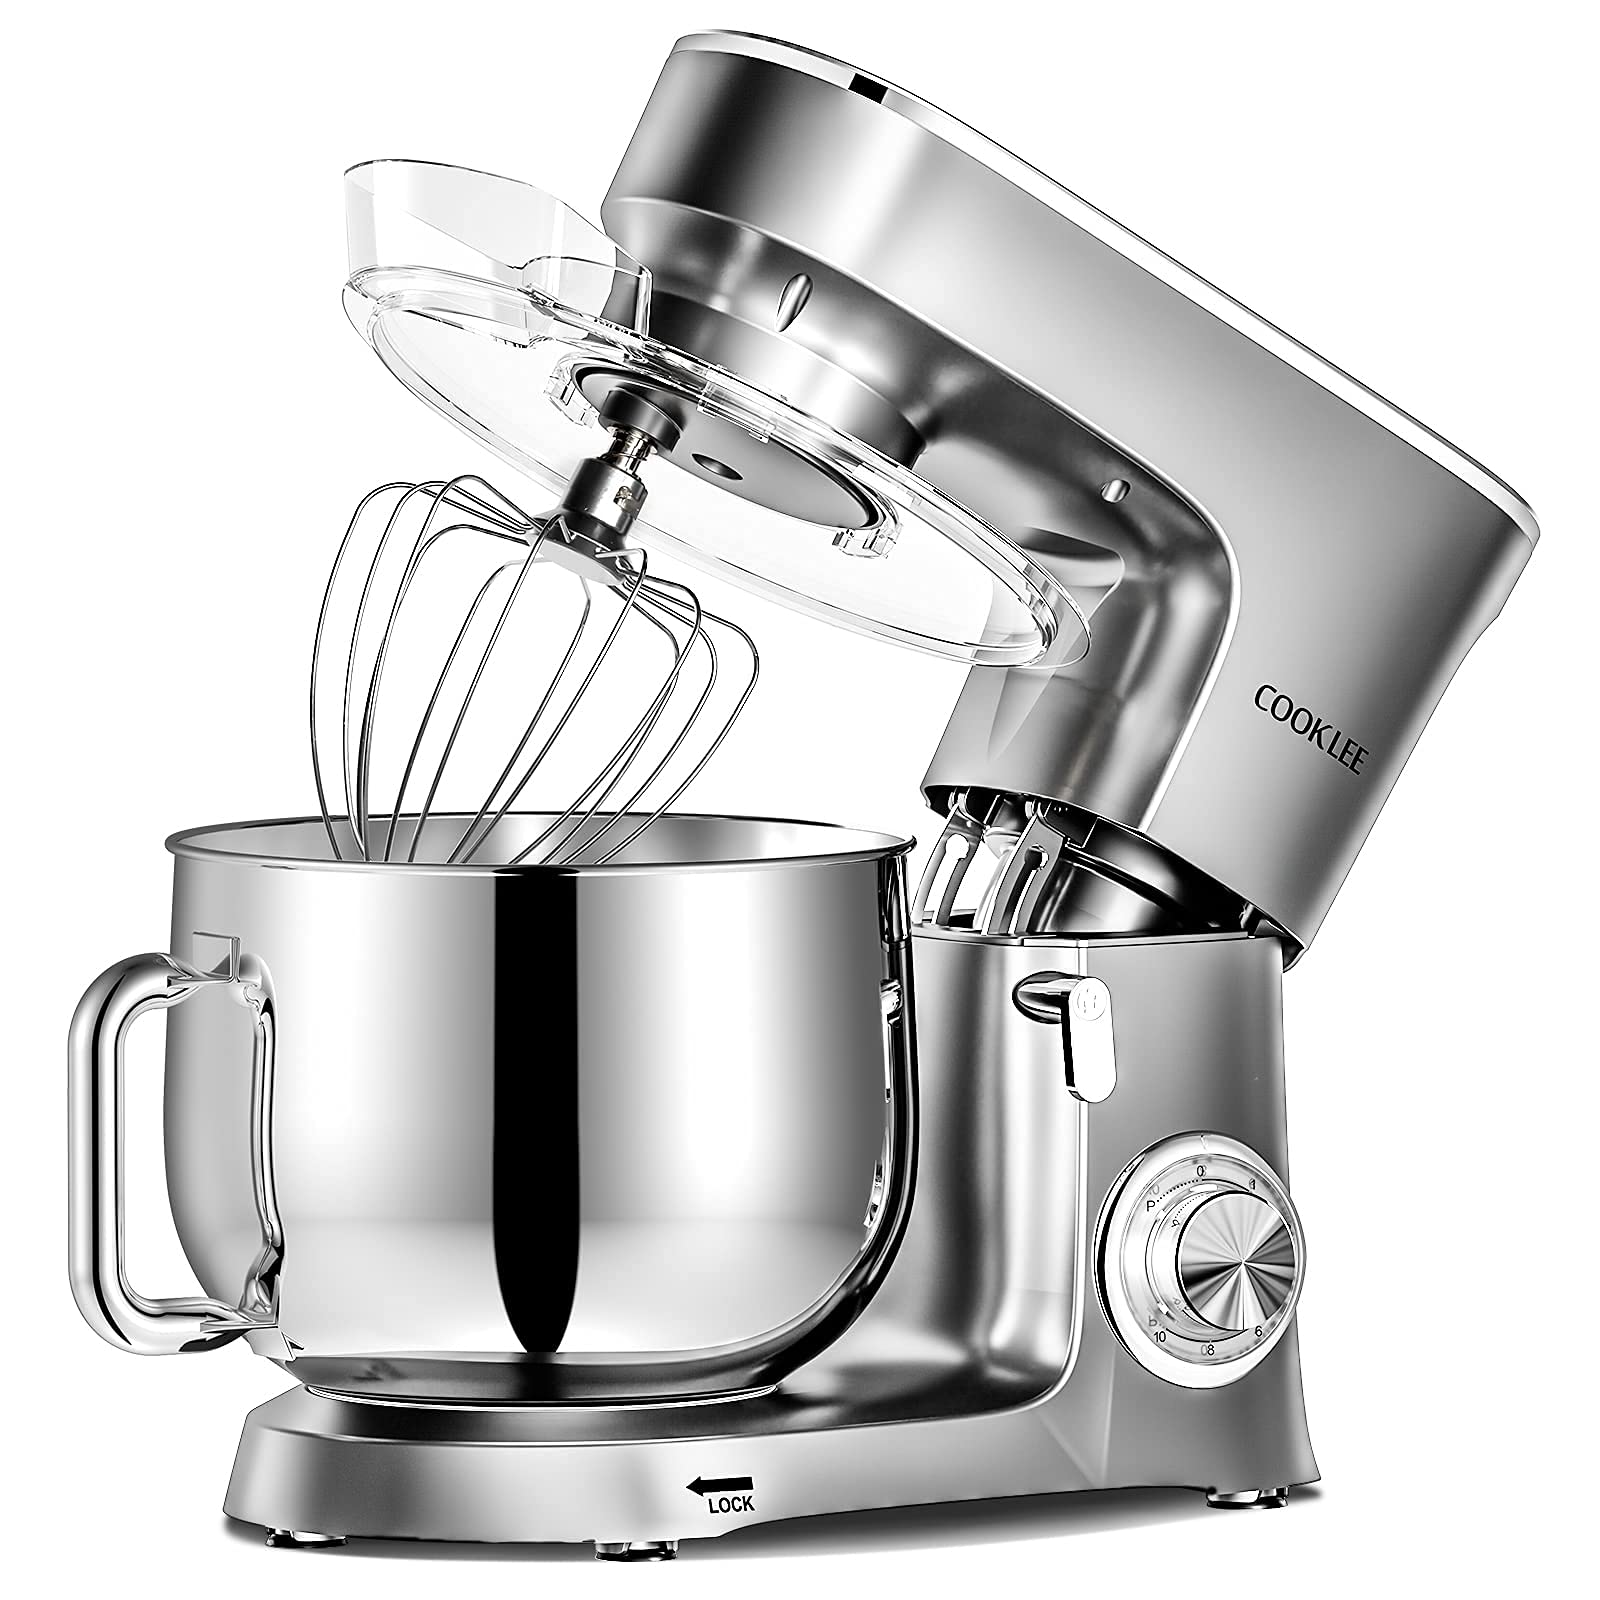 COOKLEE Stand Mixer, 9.5 Qt. 660W 10-Speed Electric Kitchen Mixer with Dishwasher-Safe Dough Hooks, Flat Beaters, Wire Whip & Pouring Shield Attachments for Most Home Cooks, SM-1551, Silver